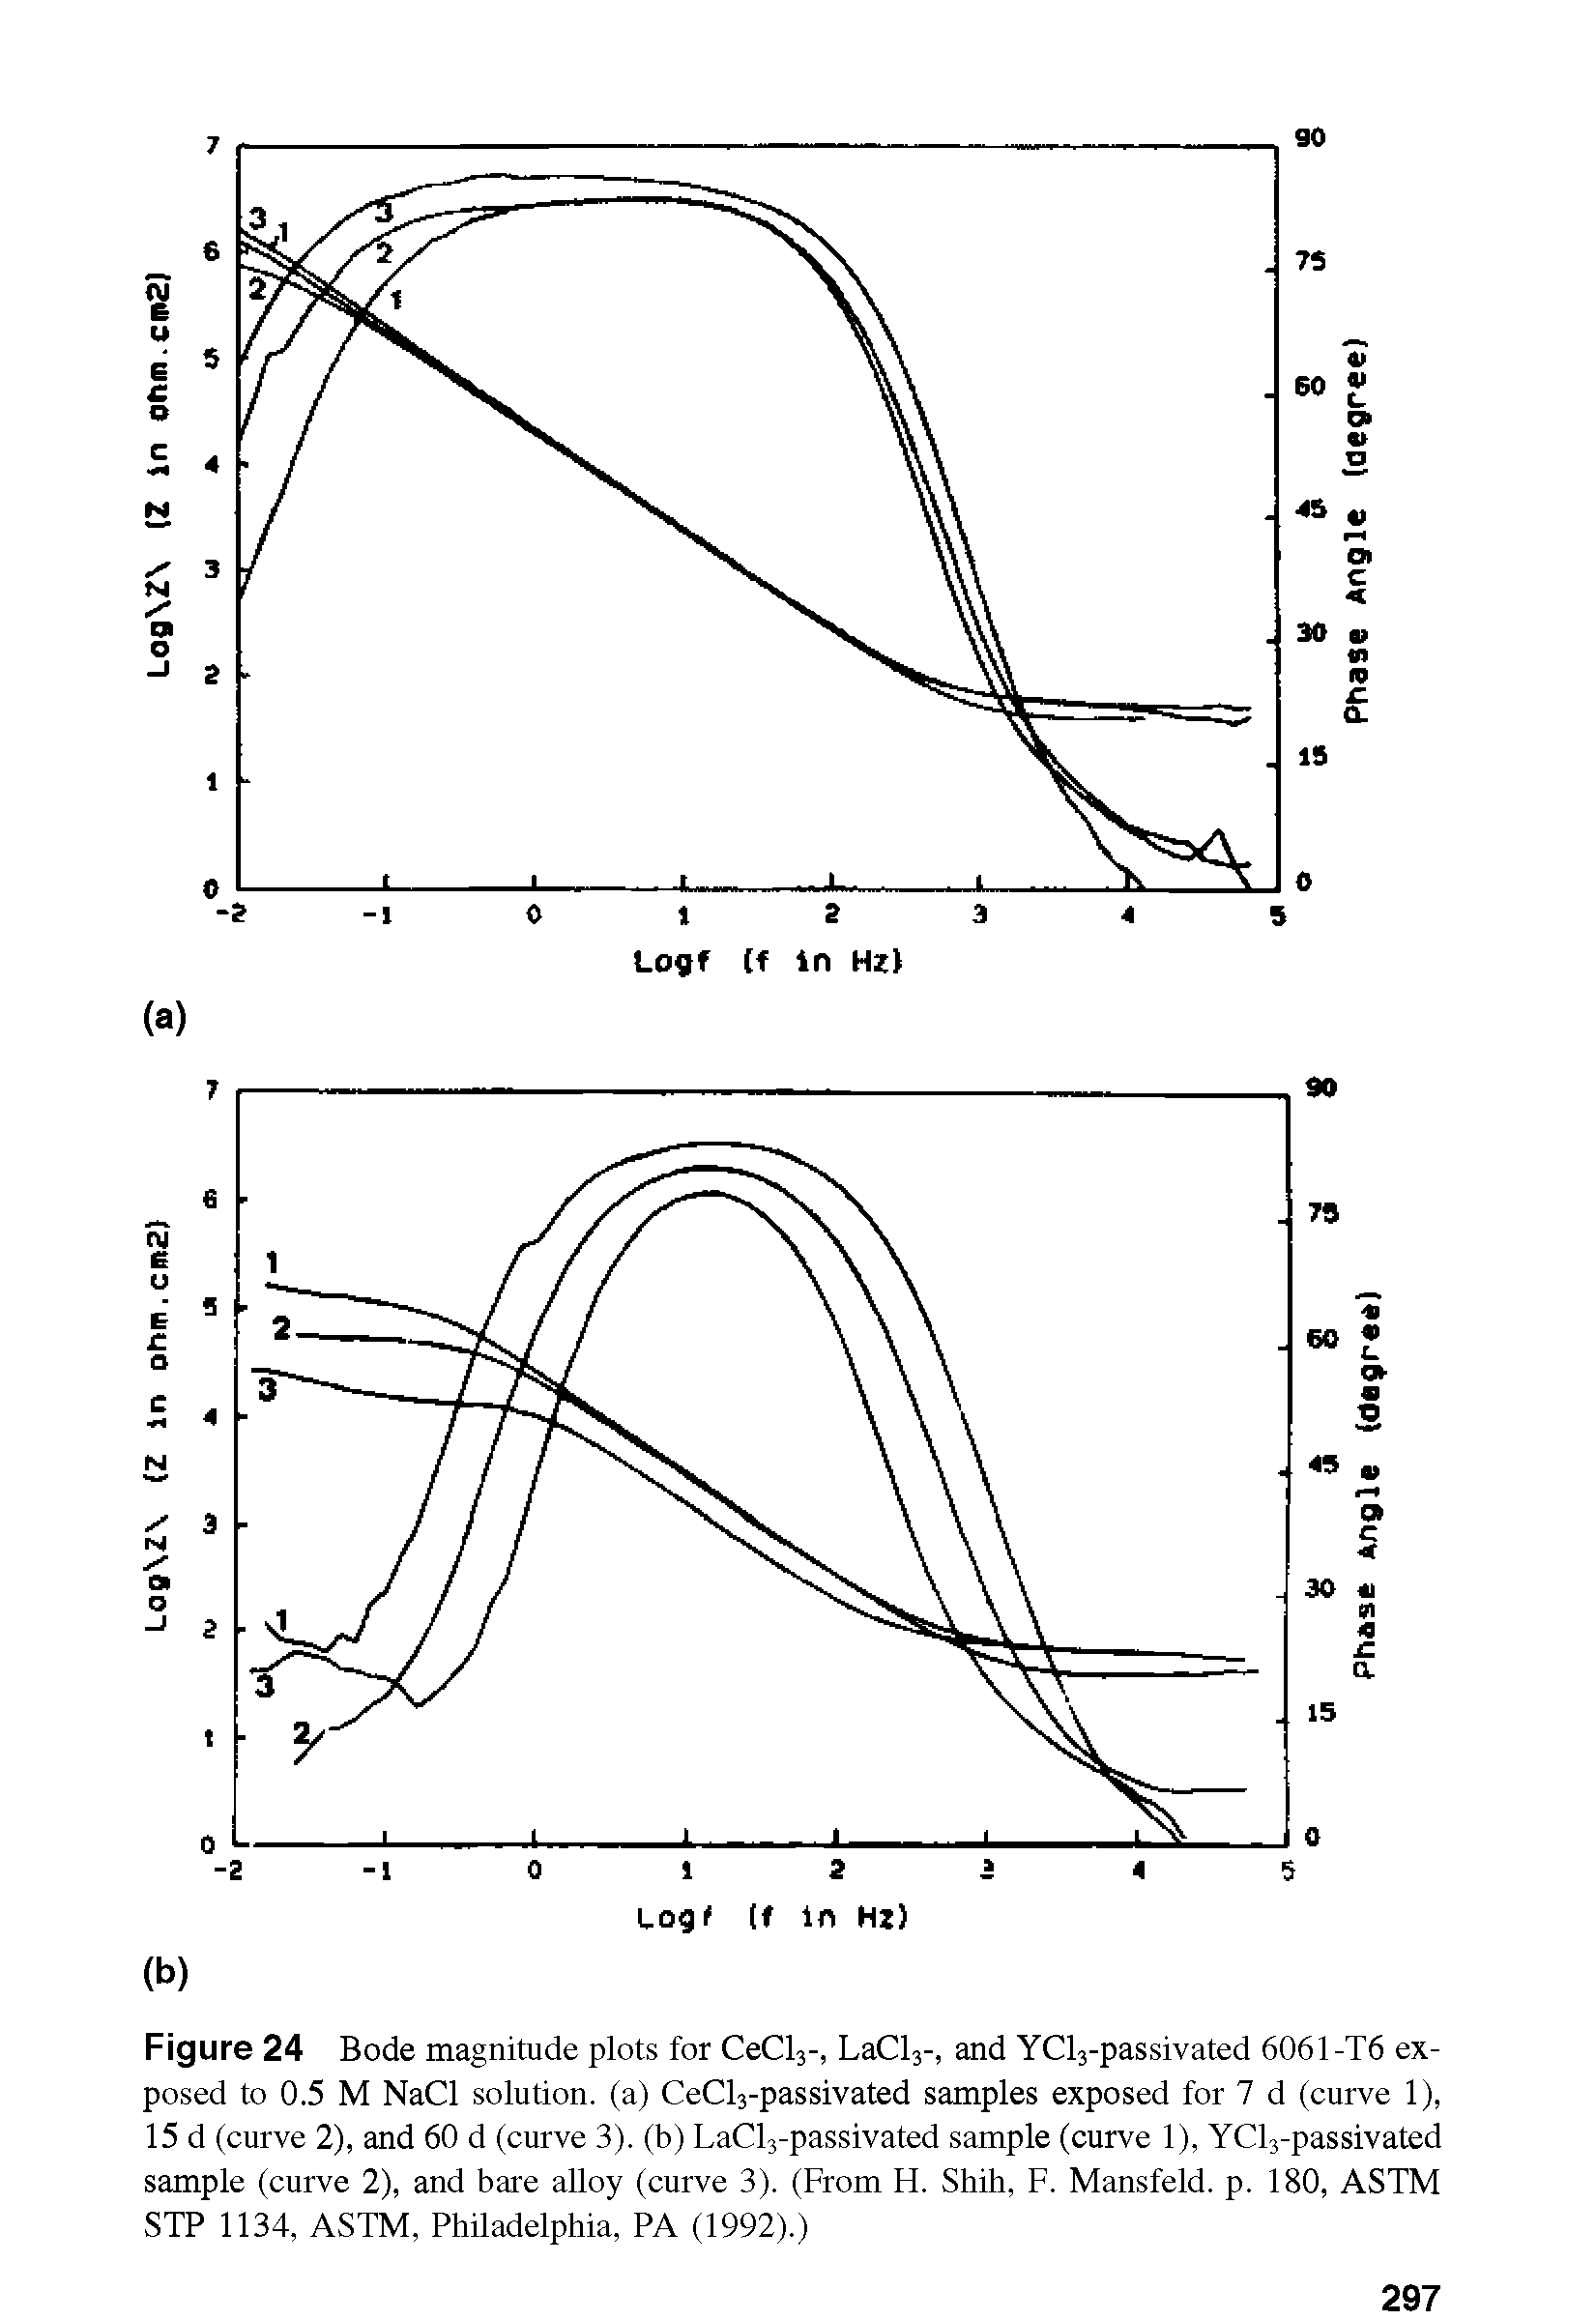 Figure 24 Bode magnitude plots for CeCl3-, LaCl3-, and YCl3-passivated 6061-T6 exposed to 0.5 M NaCl solution, (a) CeCl3-passivated samples exposed for 7 d (curve 1), 15 d (curve 2), and 60 d (curve 3). (b) LaCl3-passivated sample (curve 1), YCl3-passivated sample (curve 2), and bare alloy (curve 3). (From H. Shih, F. Mansfeld. p. 180, ASTM STP 1134, ASTM, Philadelphia, PA (1992).)...